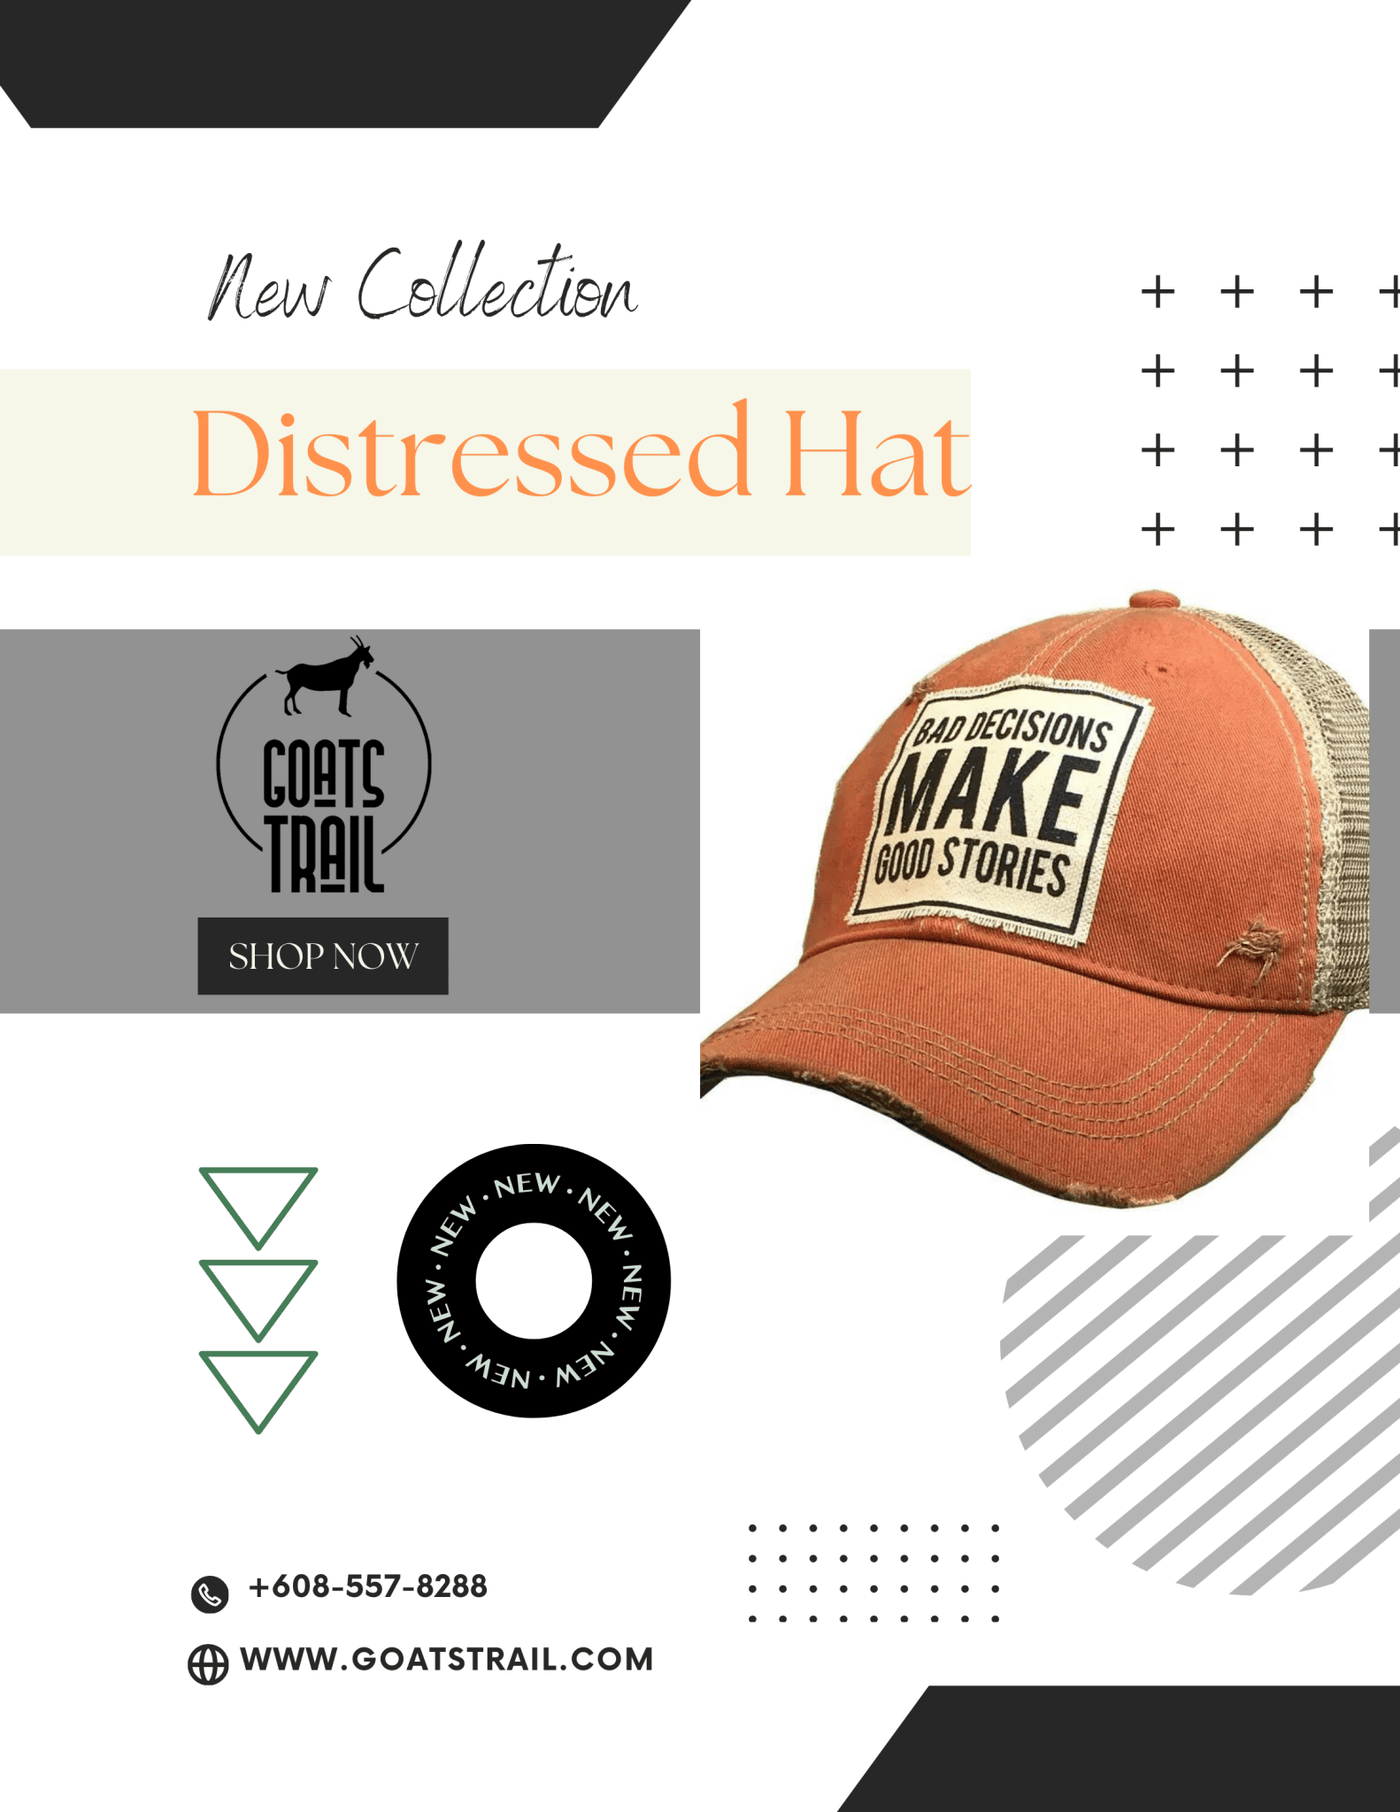 Distressed Bad Decisions Make Great Stories Hat - Goats Trail Off-Road Apparel Company